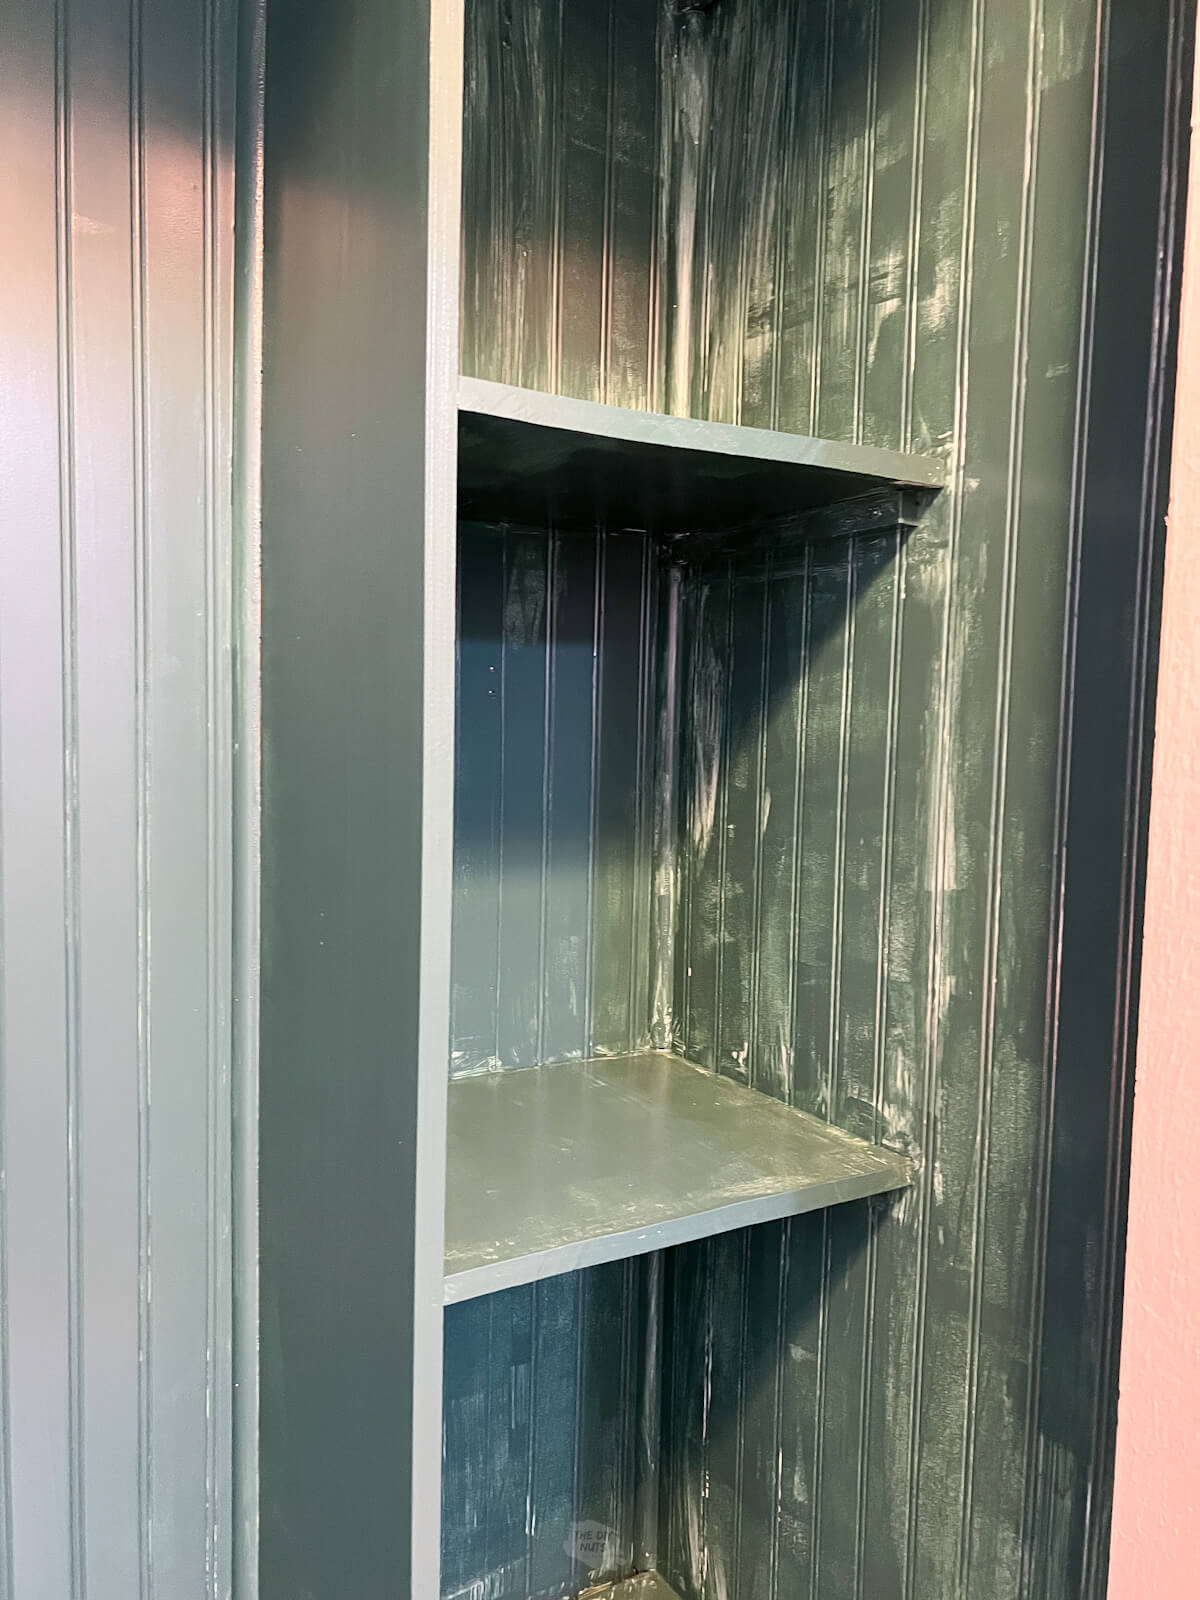 wood shelves with first coat of green paint on them.